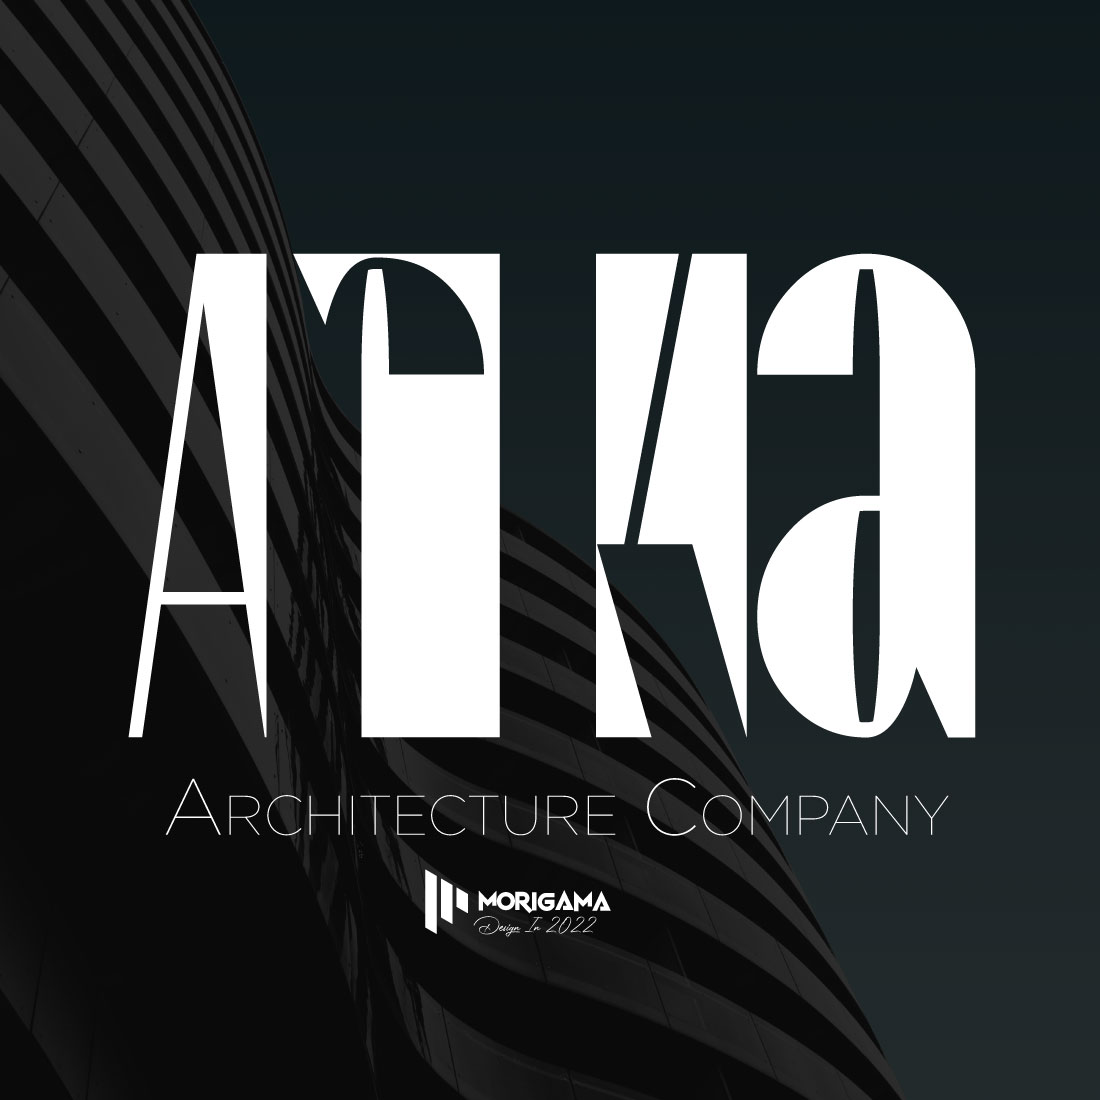 Arka A Architecture Logo Template cover image.